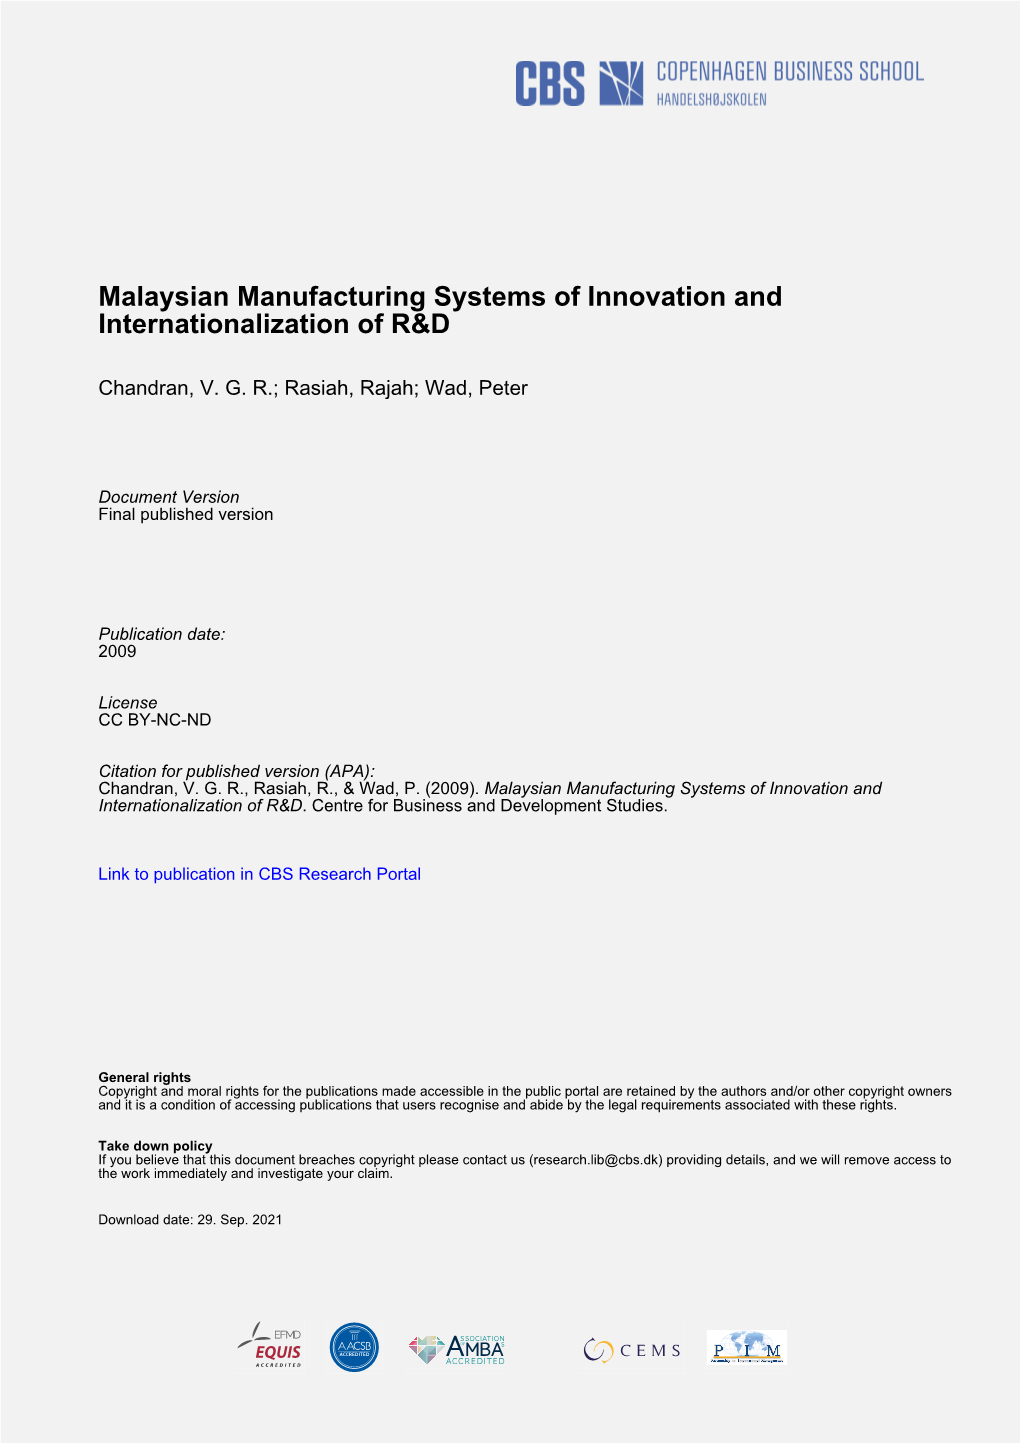 Malaysian Manufacturing Systems of Innovation and Internationalization of R&D